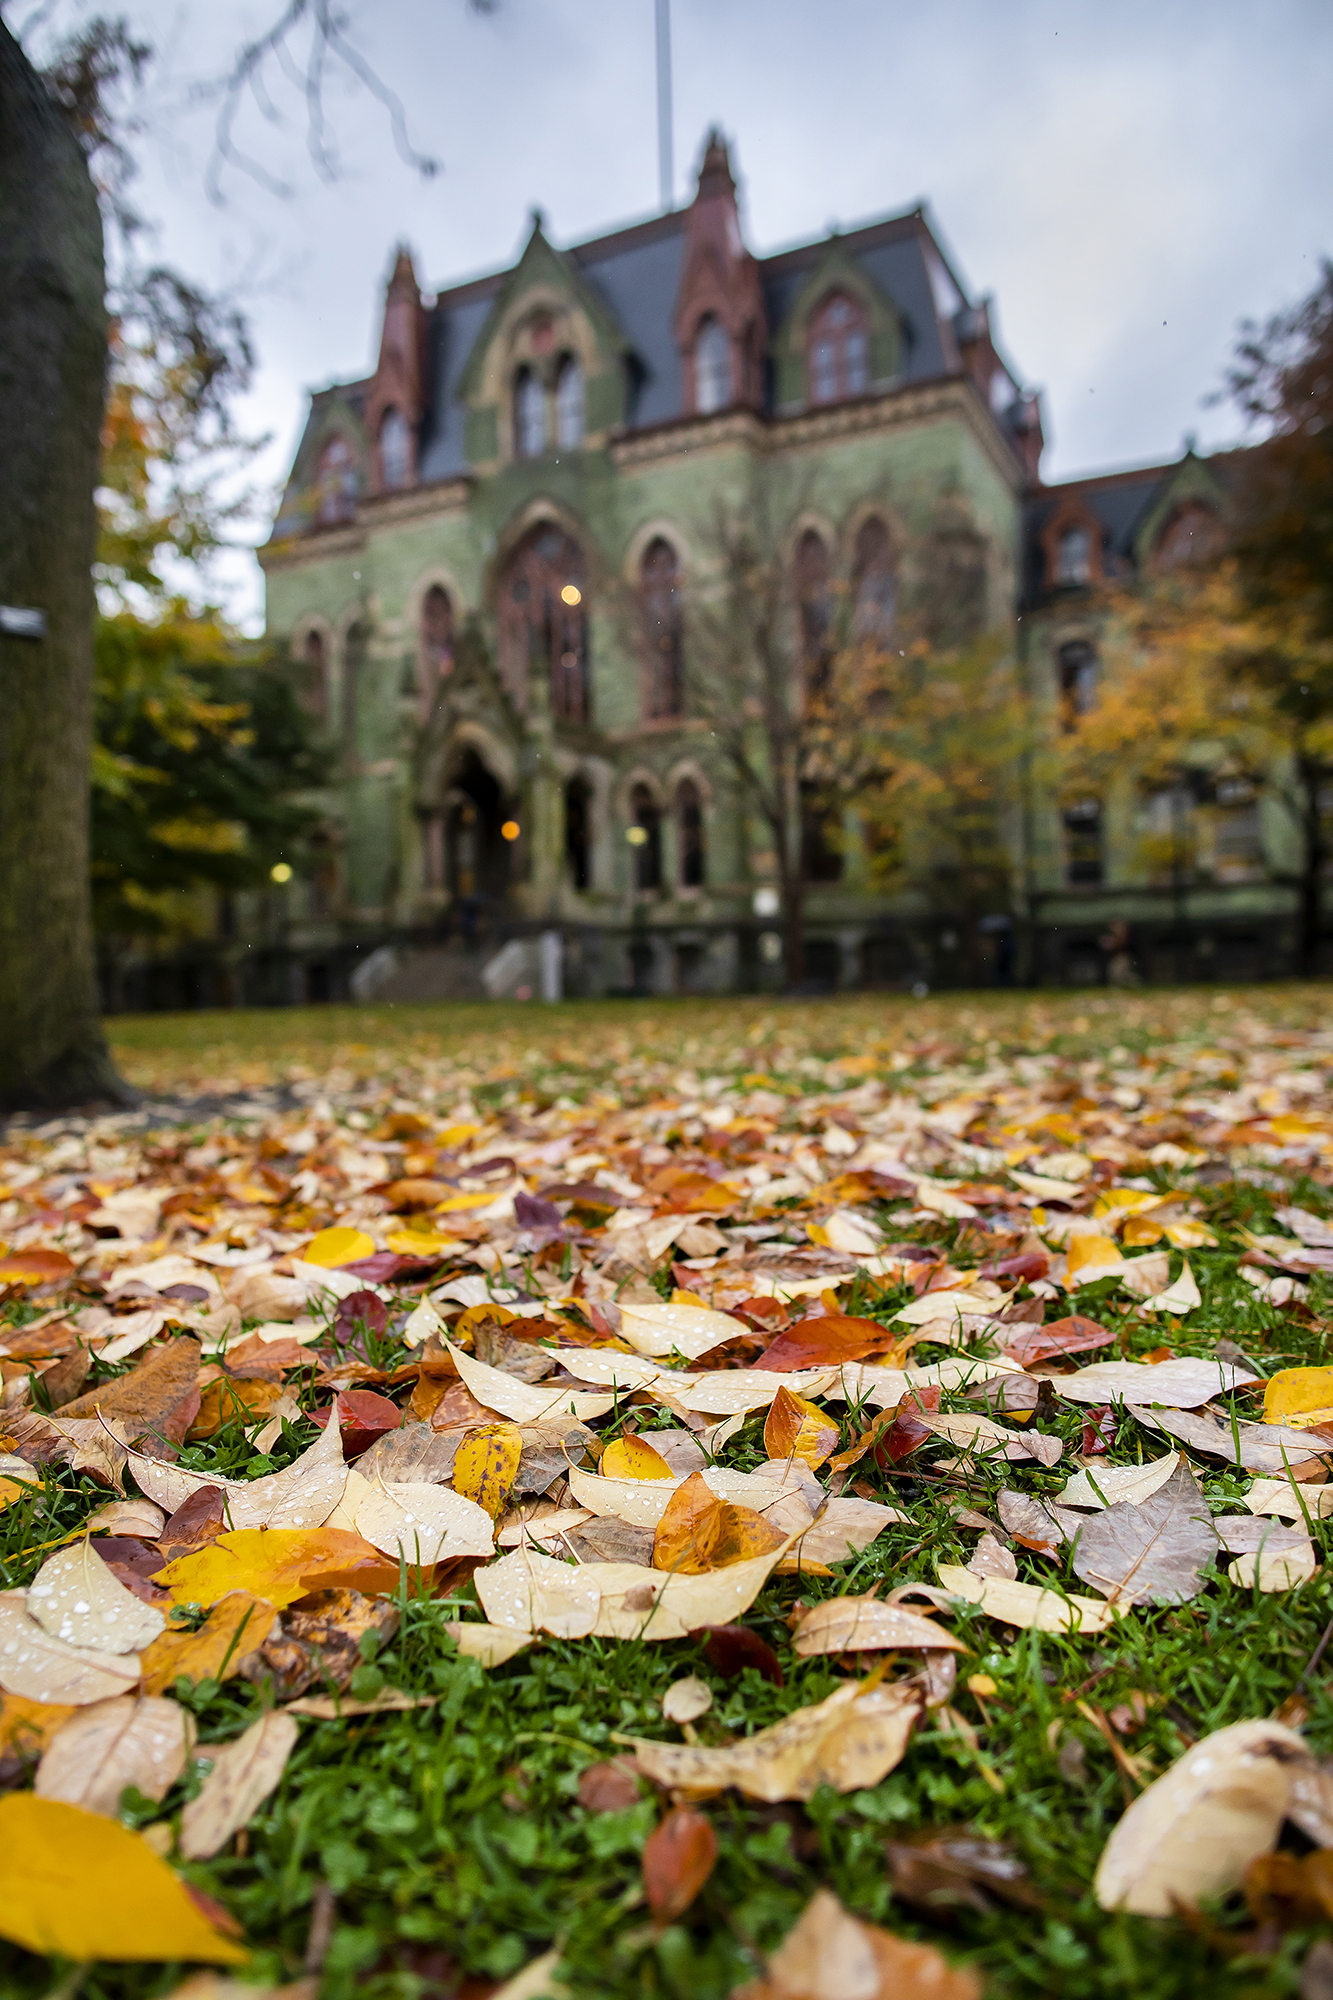 Leaves speckled with rain drops on the ground in the foreground on Penn's campus